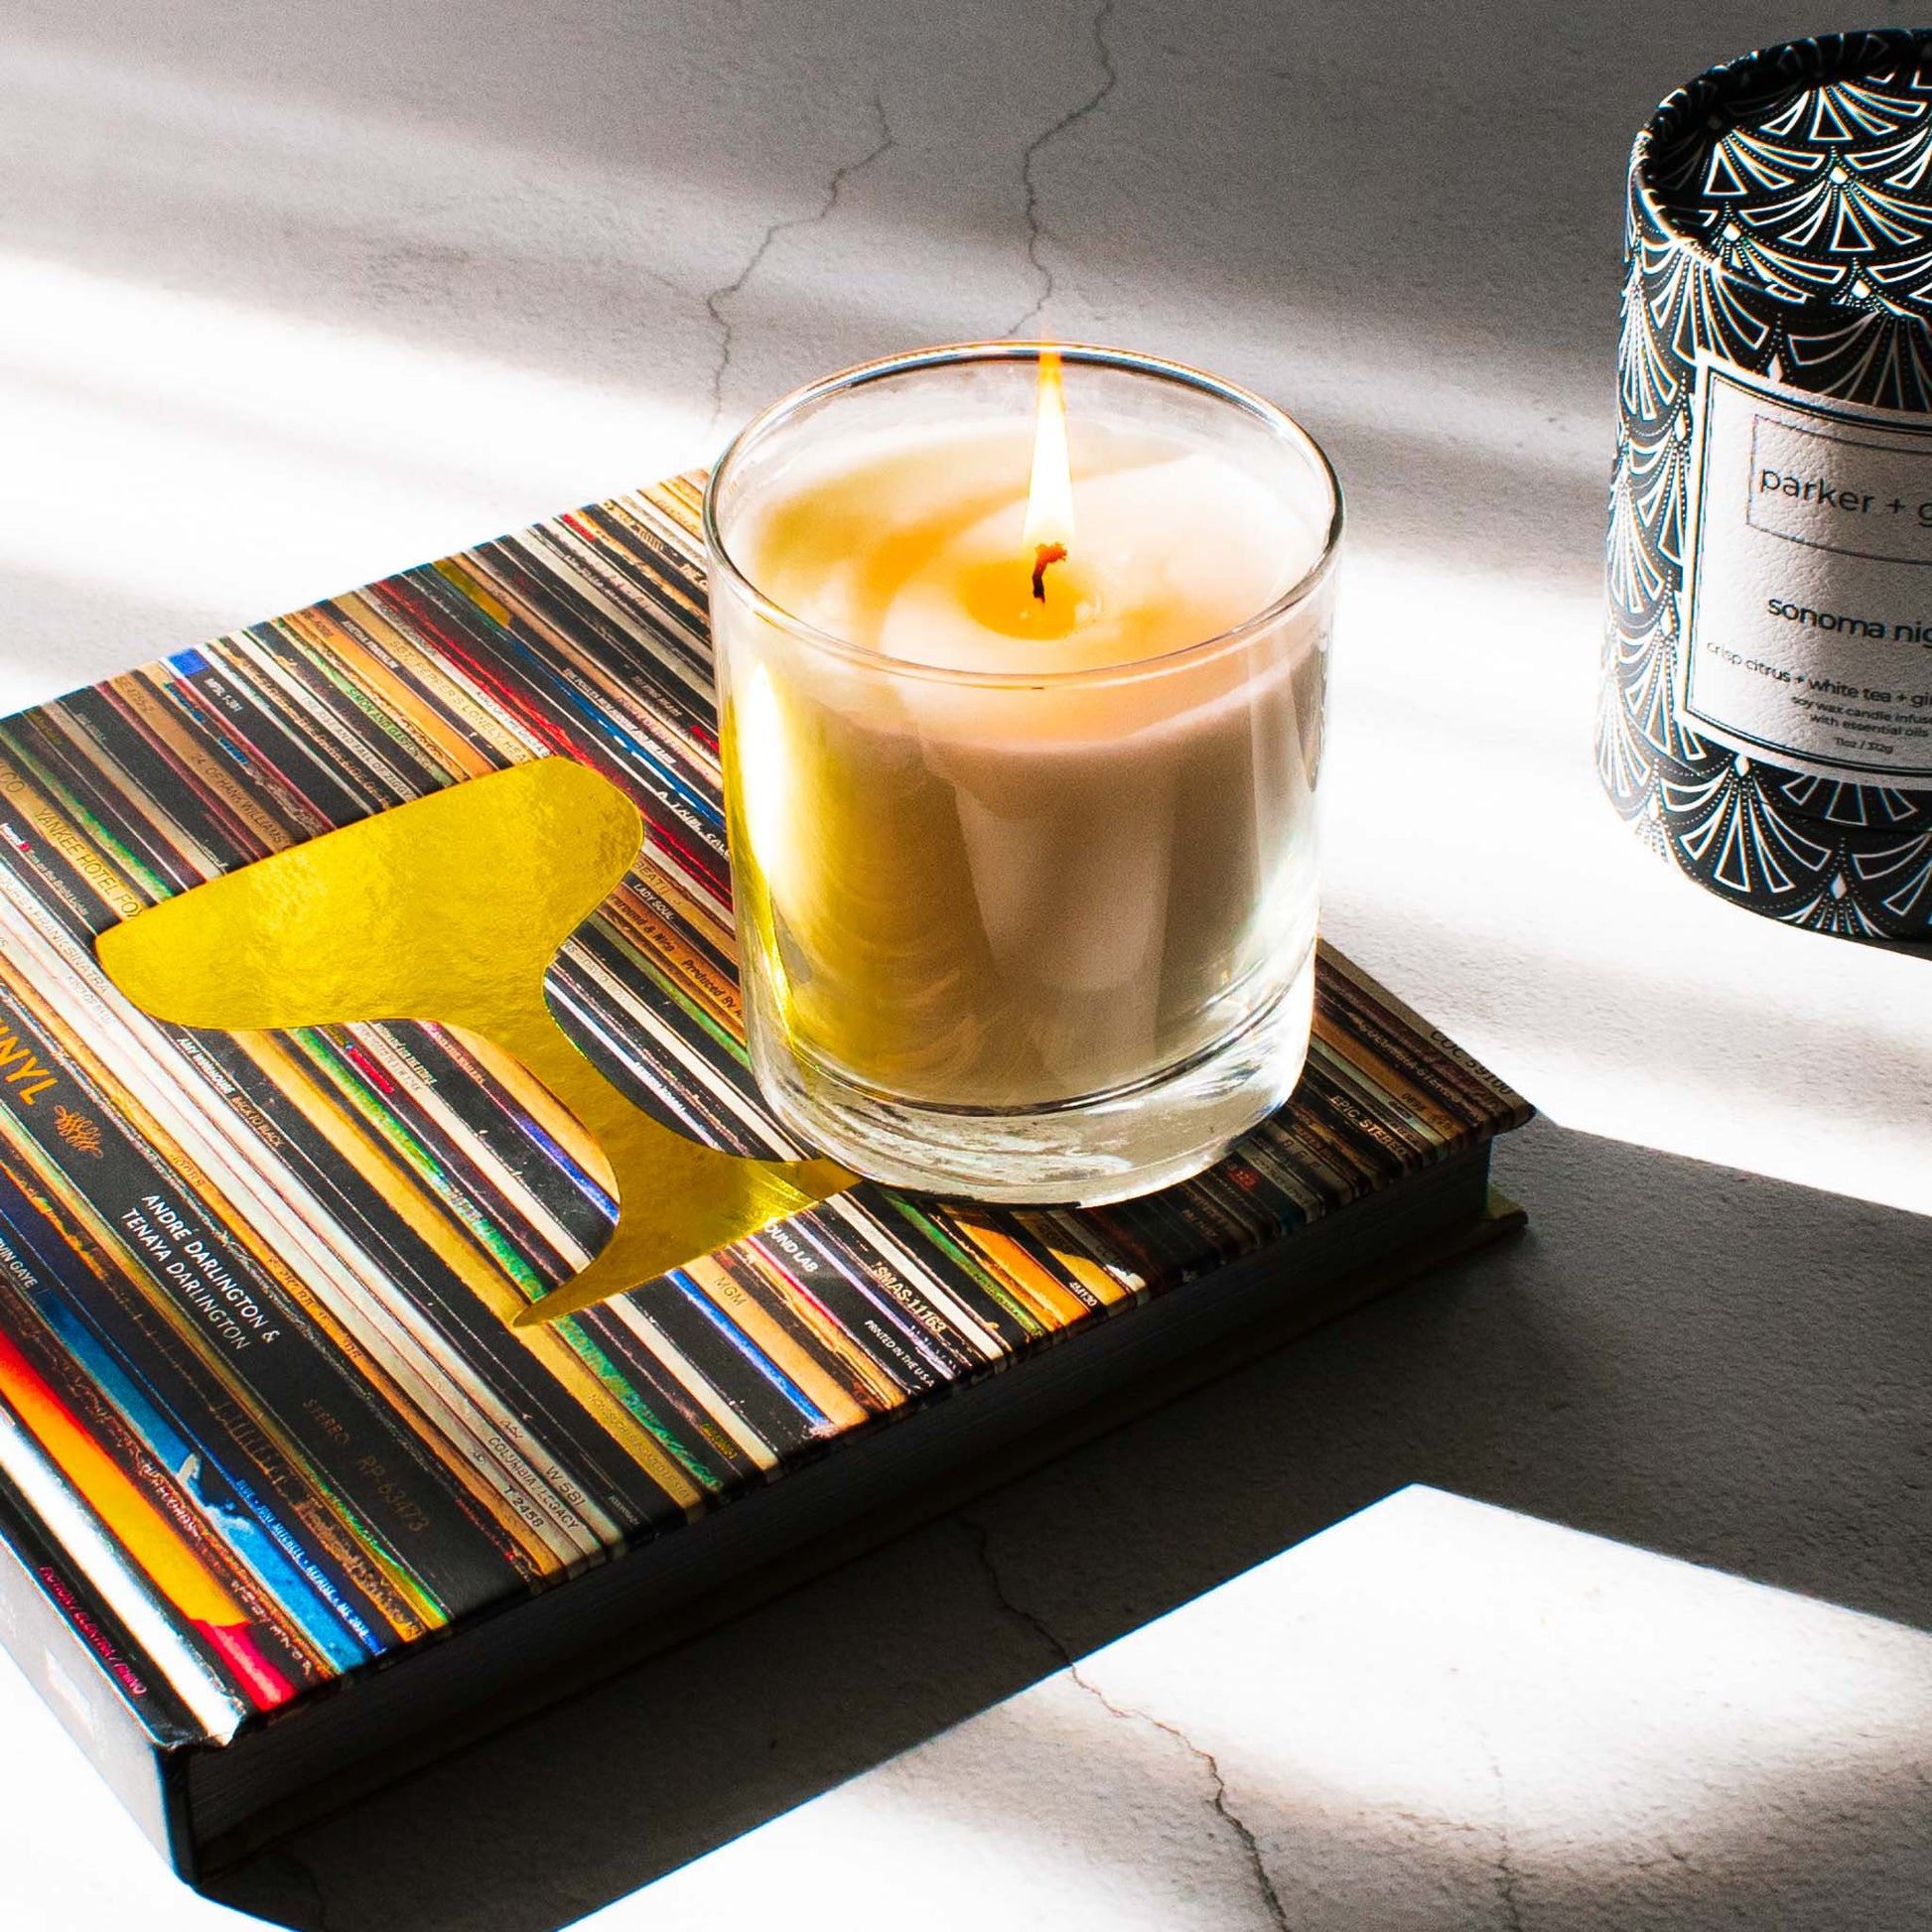 Luxury scented soy wax blend  candle on Booze and Vinyl book on limestone table.